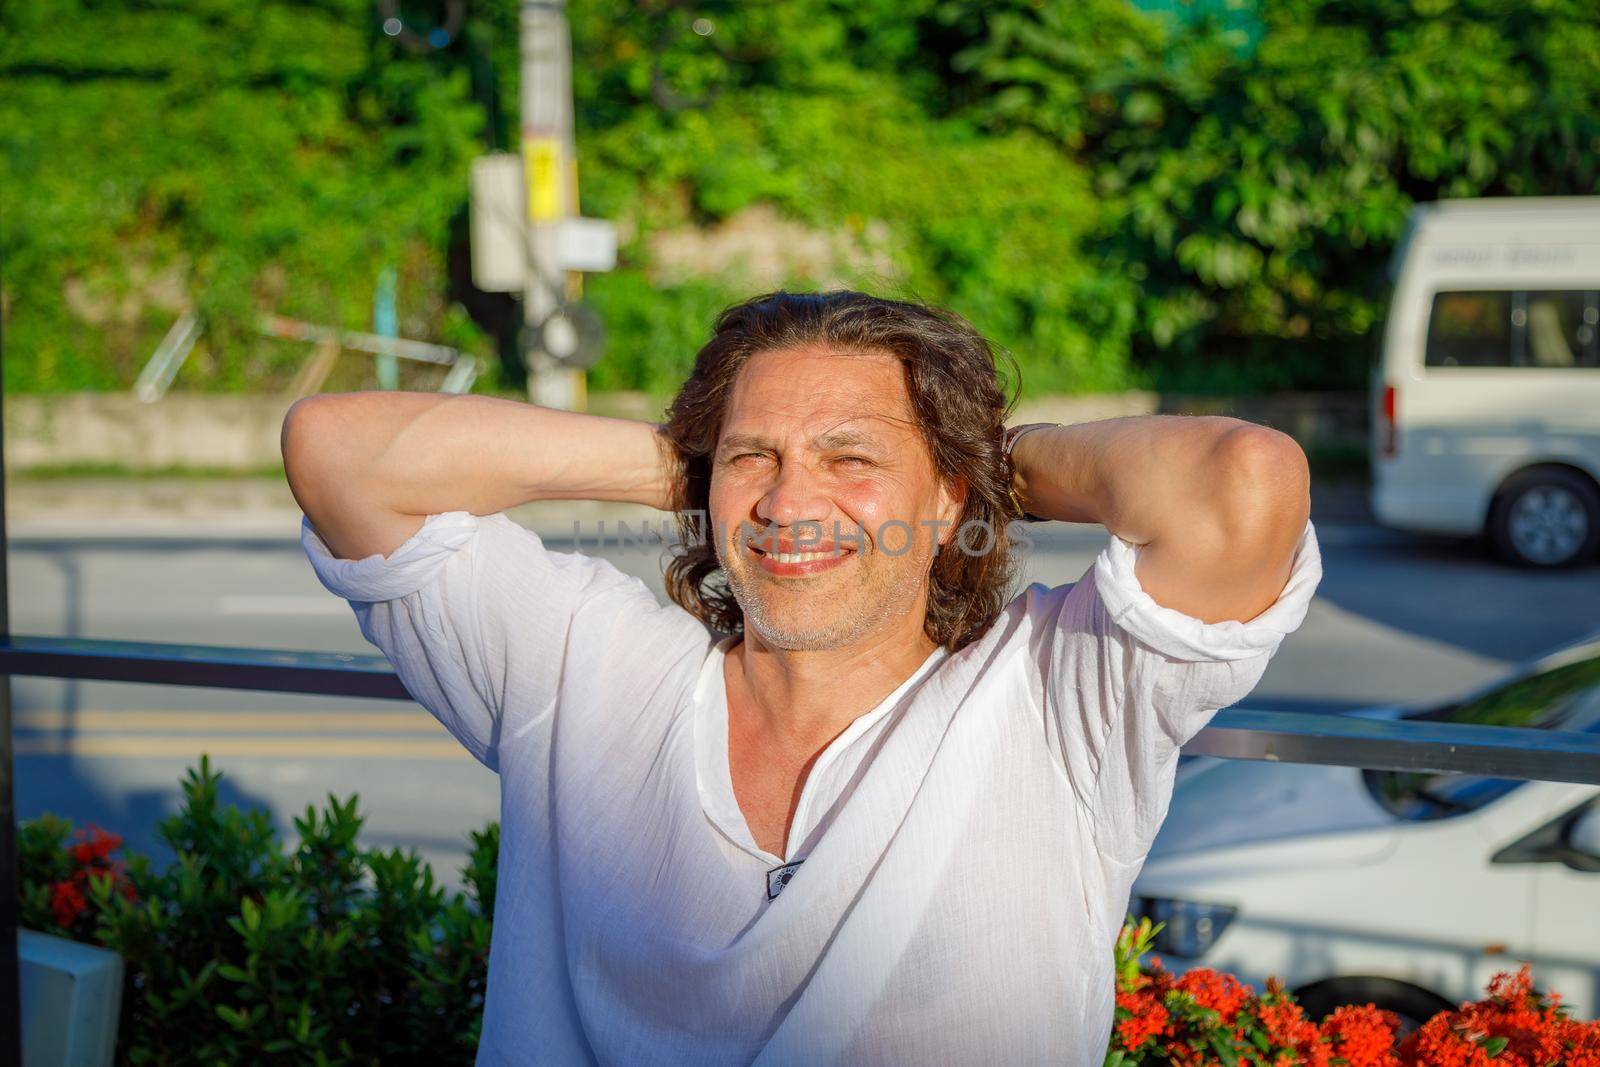 Happy adult man with long hair smiling, throwing his hands behind his head. The man in the white shirt is happy with the vacation.